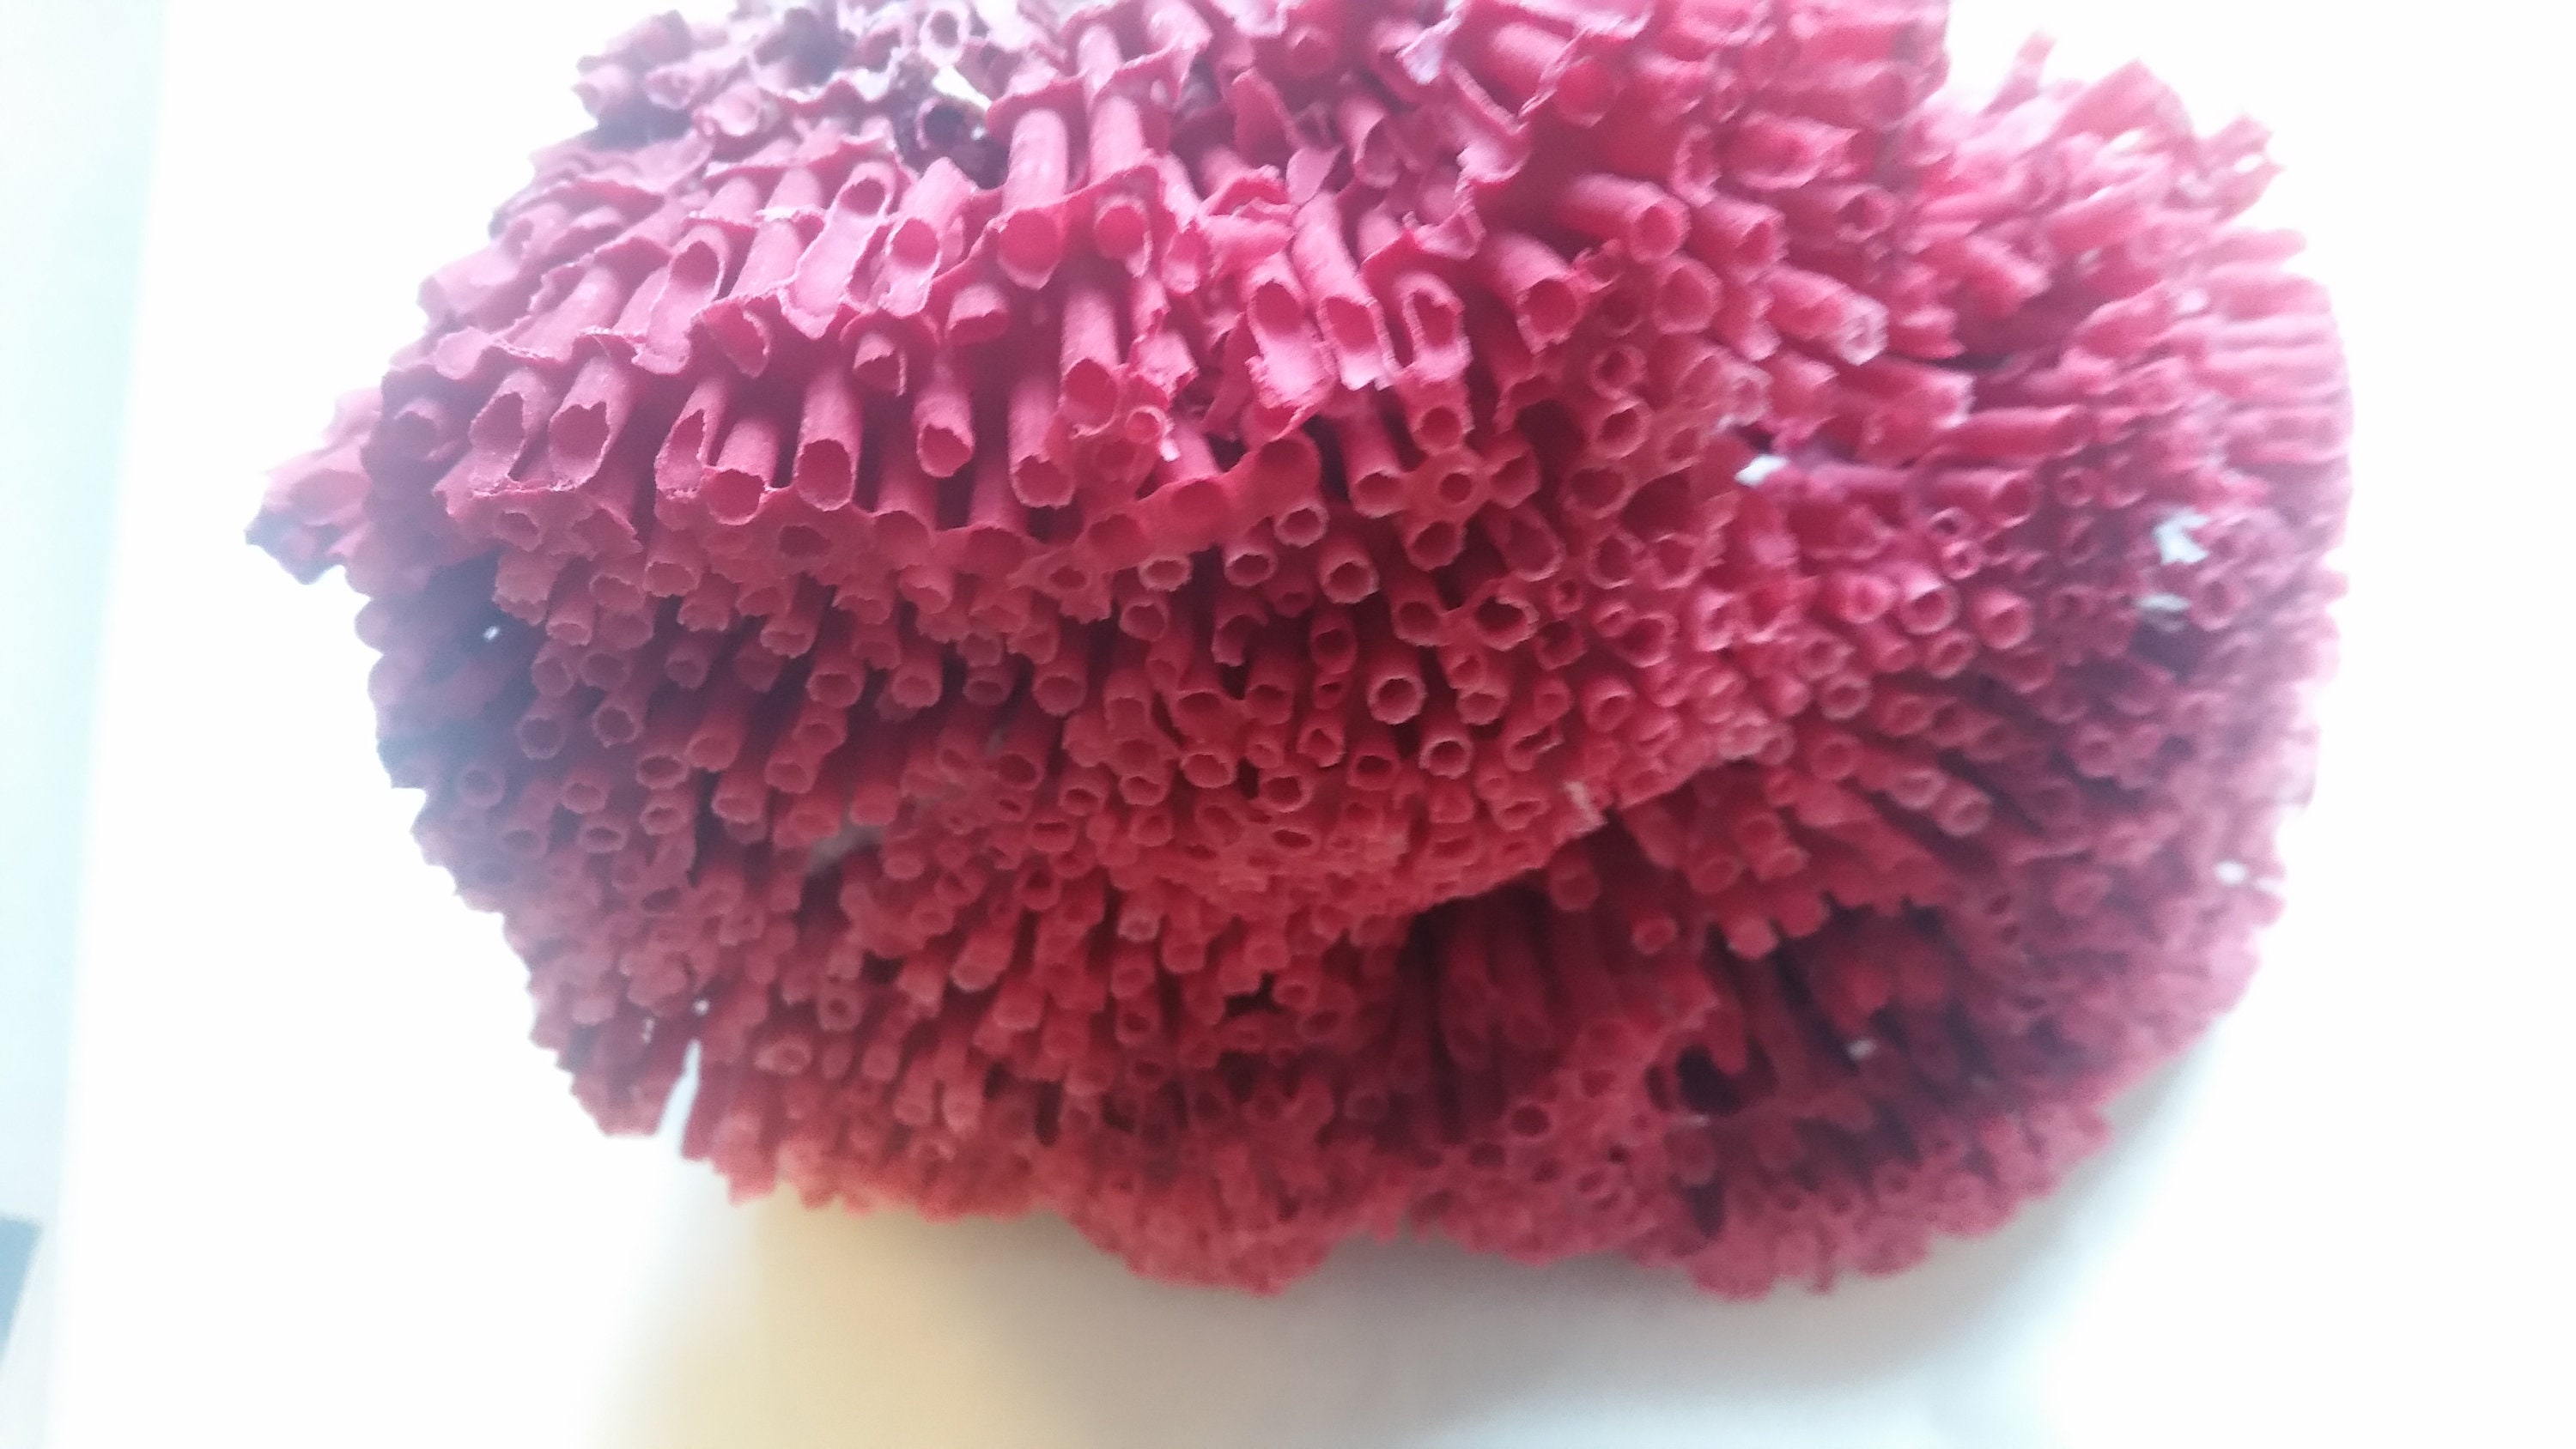 Real Coral Reef Red Pipe Organ Coral Natural 3 to 6 up to 6 to 9 and 8 1/2  to 11 Inch in Size ,wedding Table Decor,centerpiece 